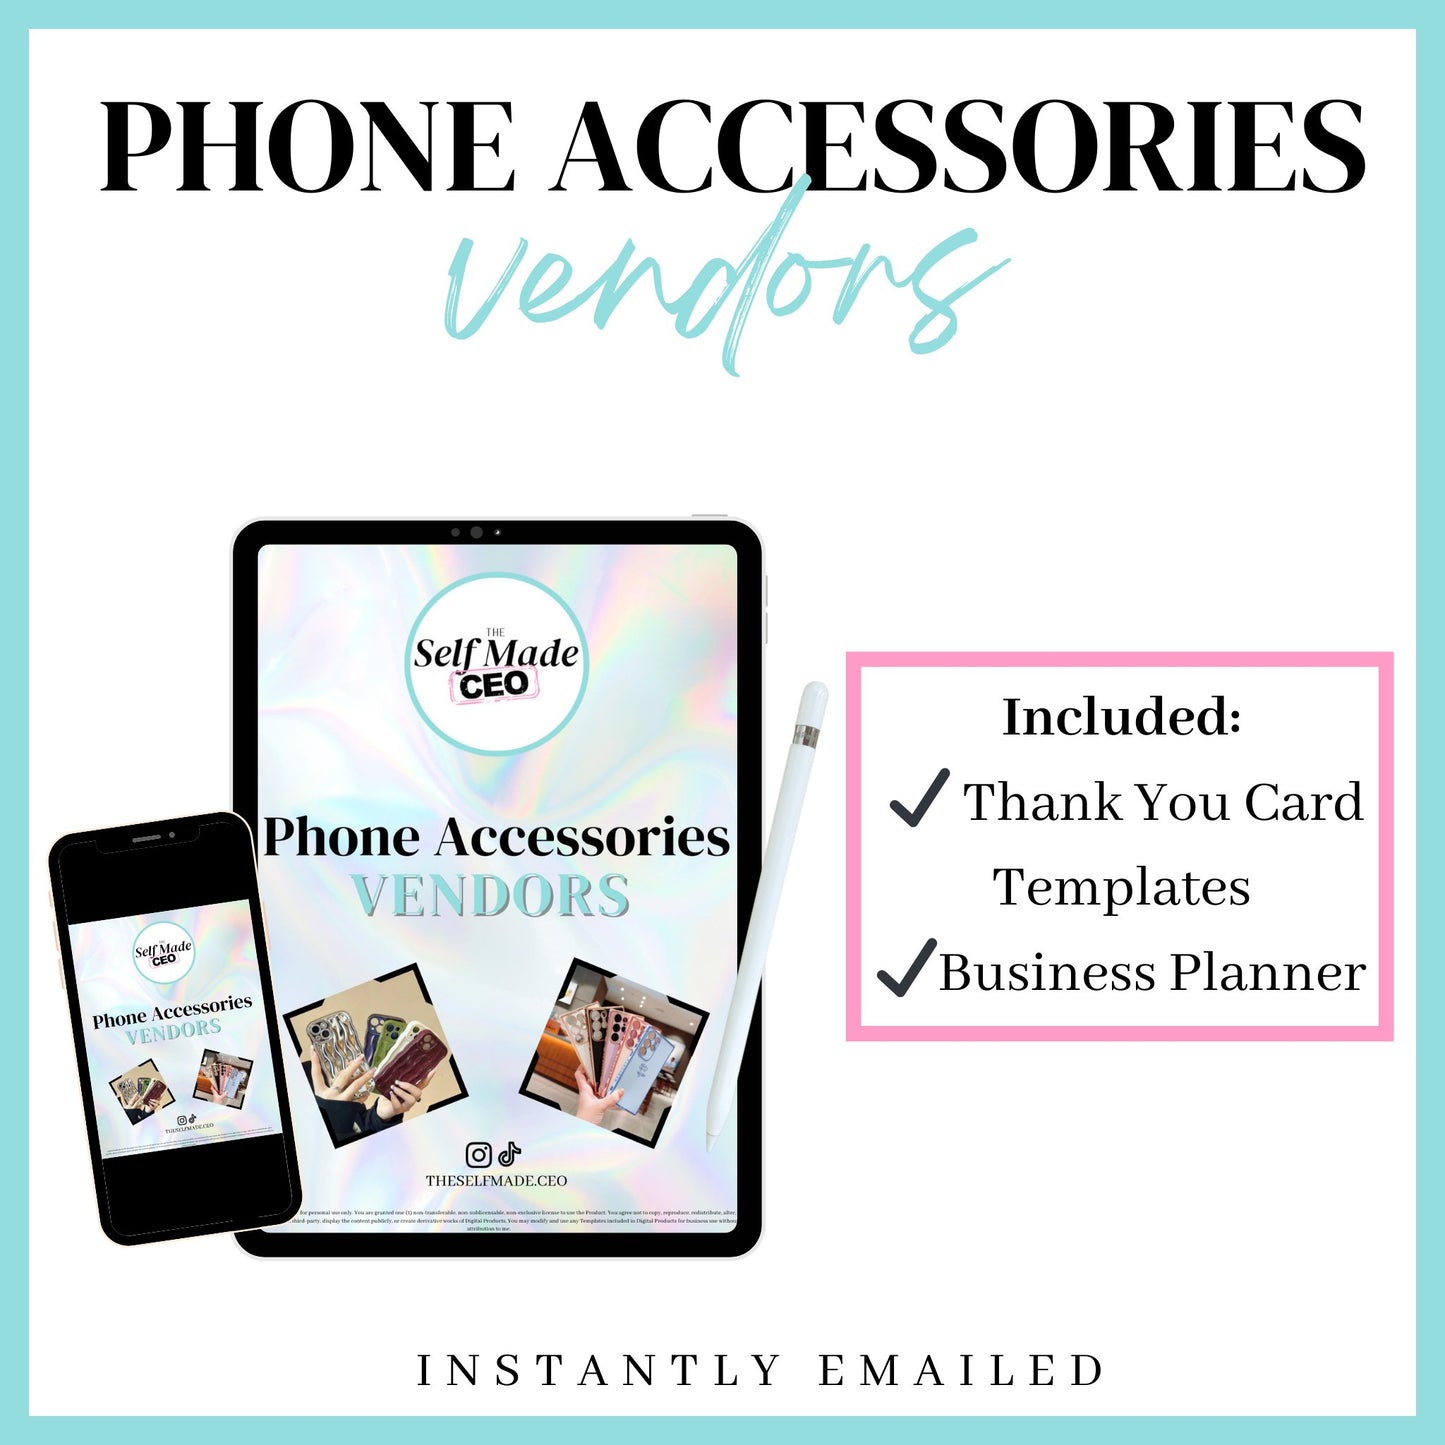 Phone Accessories Vendors - The Self Made CEO -